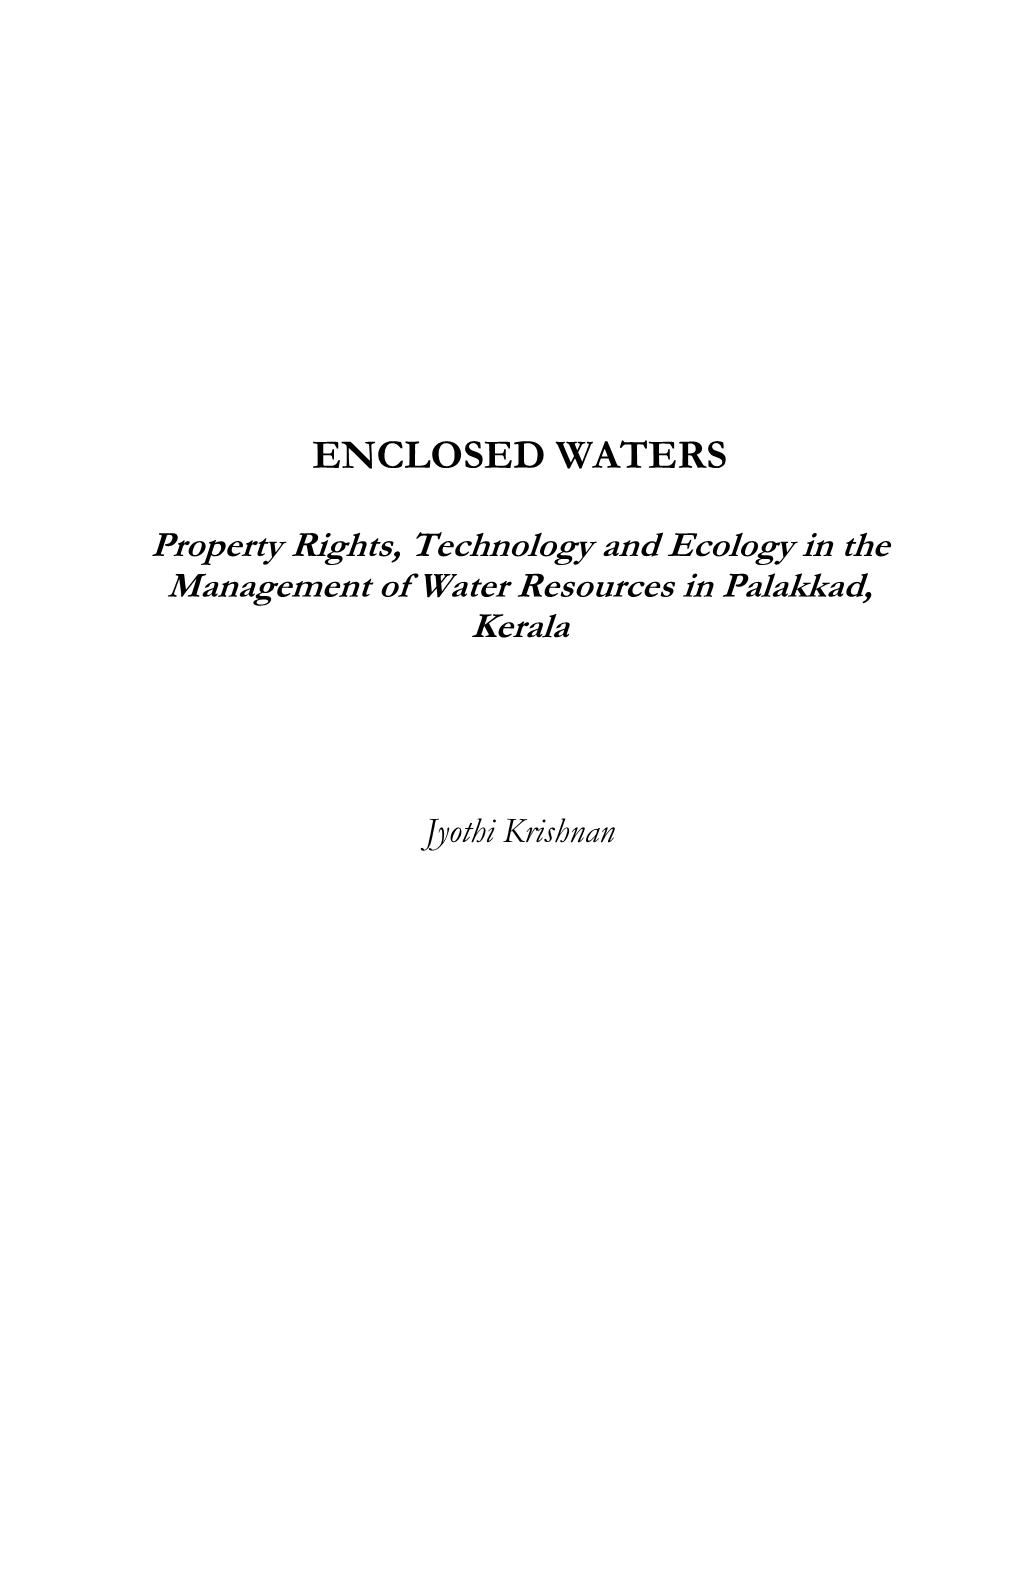 Property Rights, Technology and Ecology in the Management of Water Resources in Palakkad, Kerala